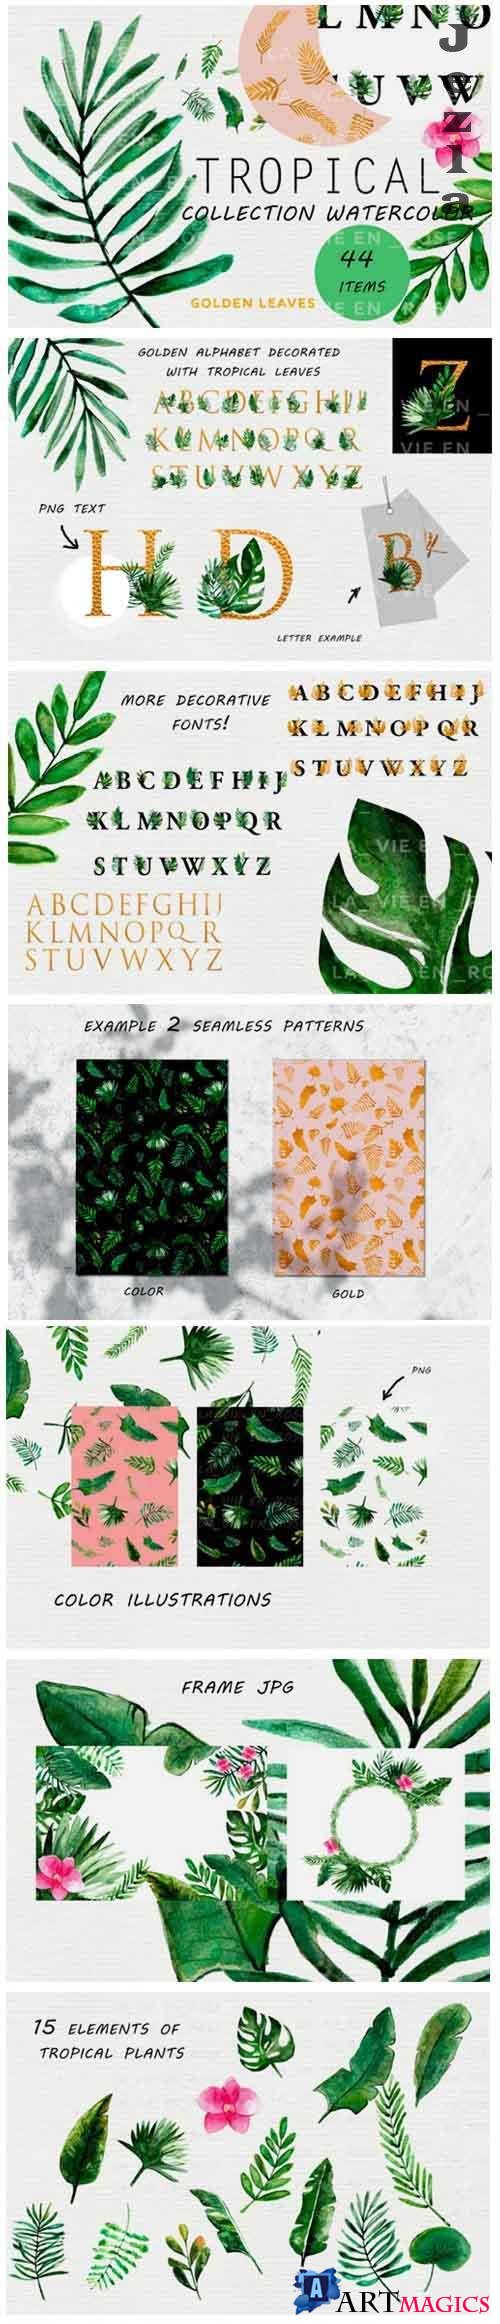 Watercolor clipart with tropical leaves - 741506